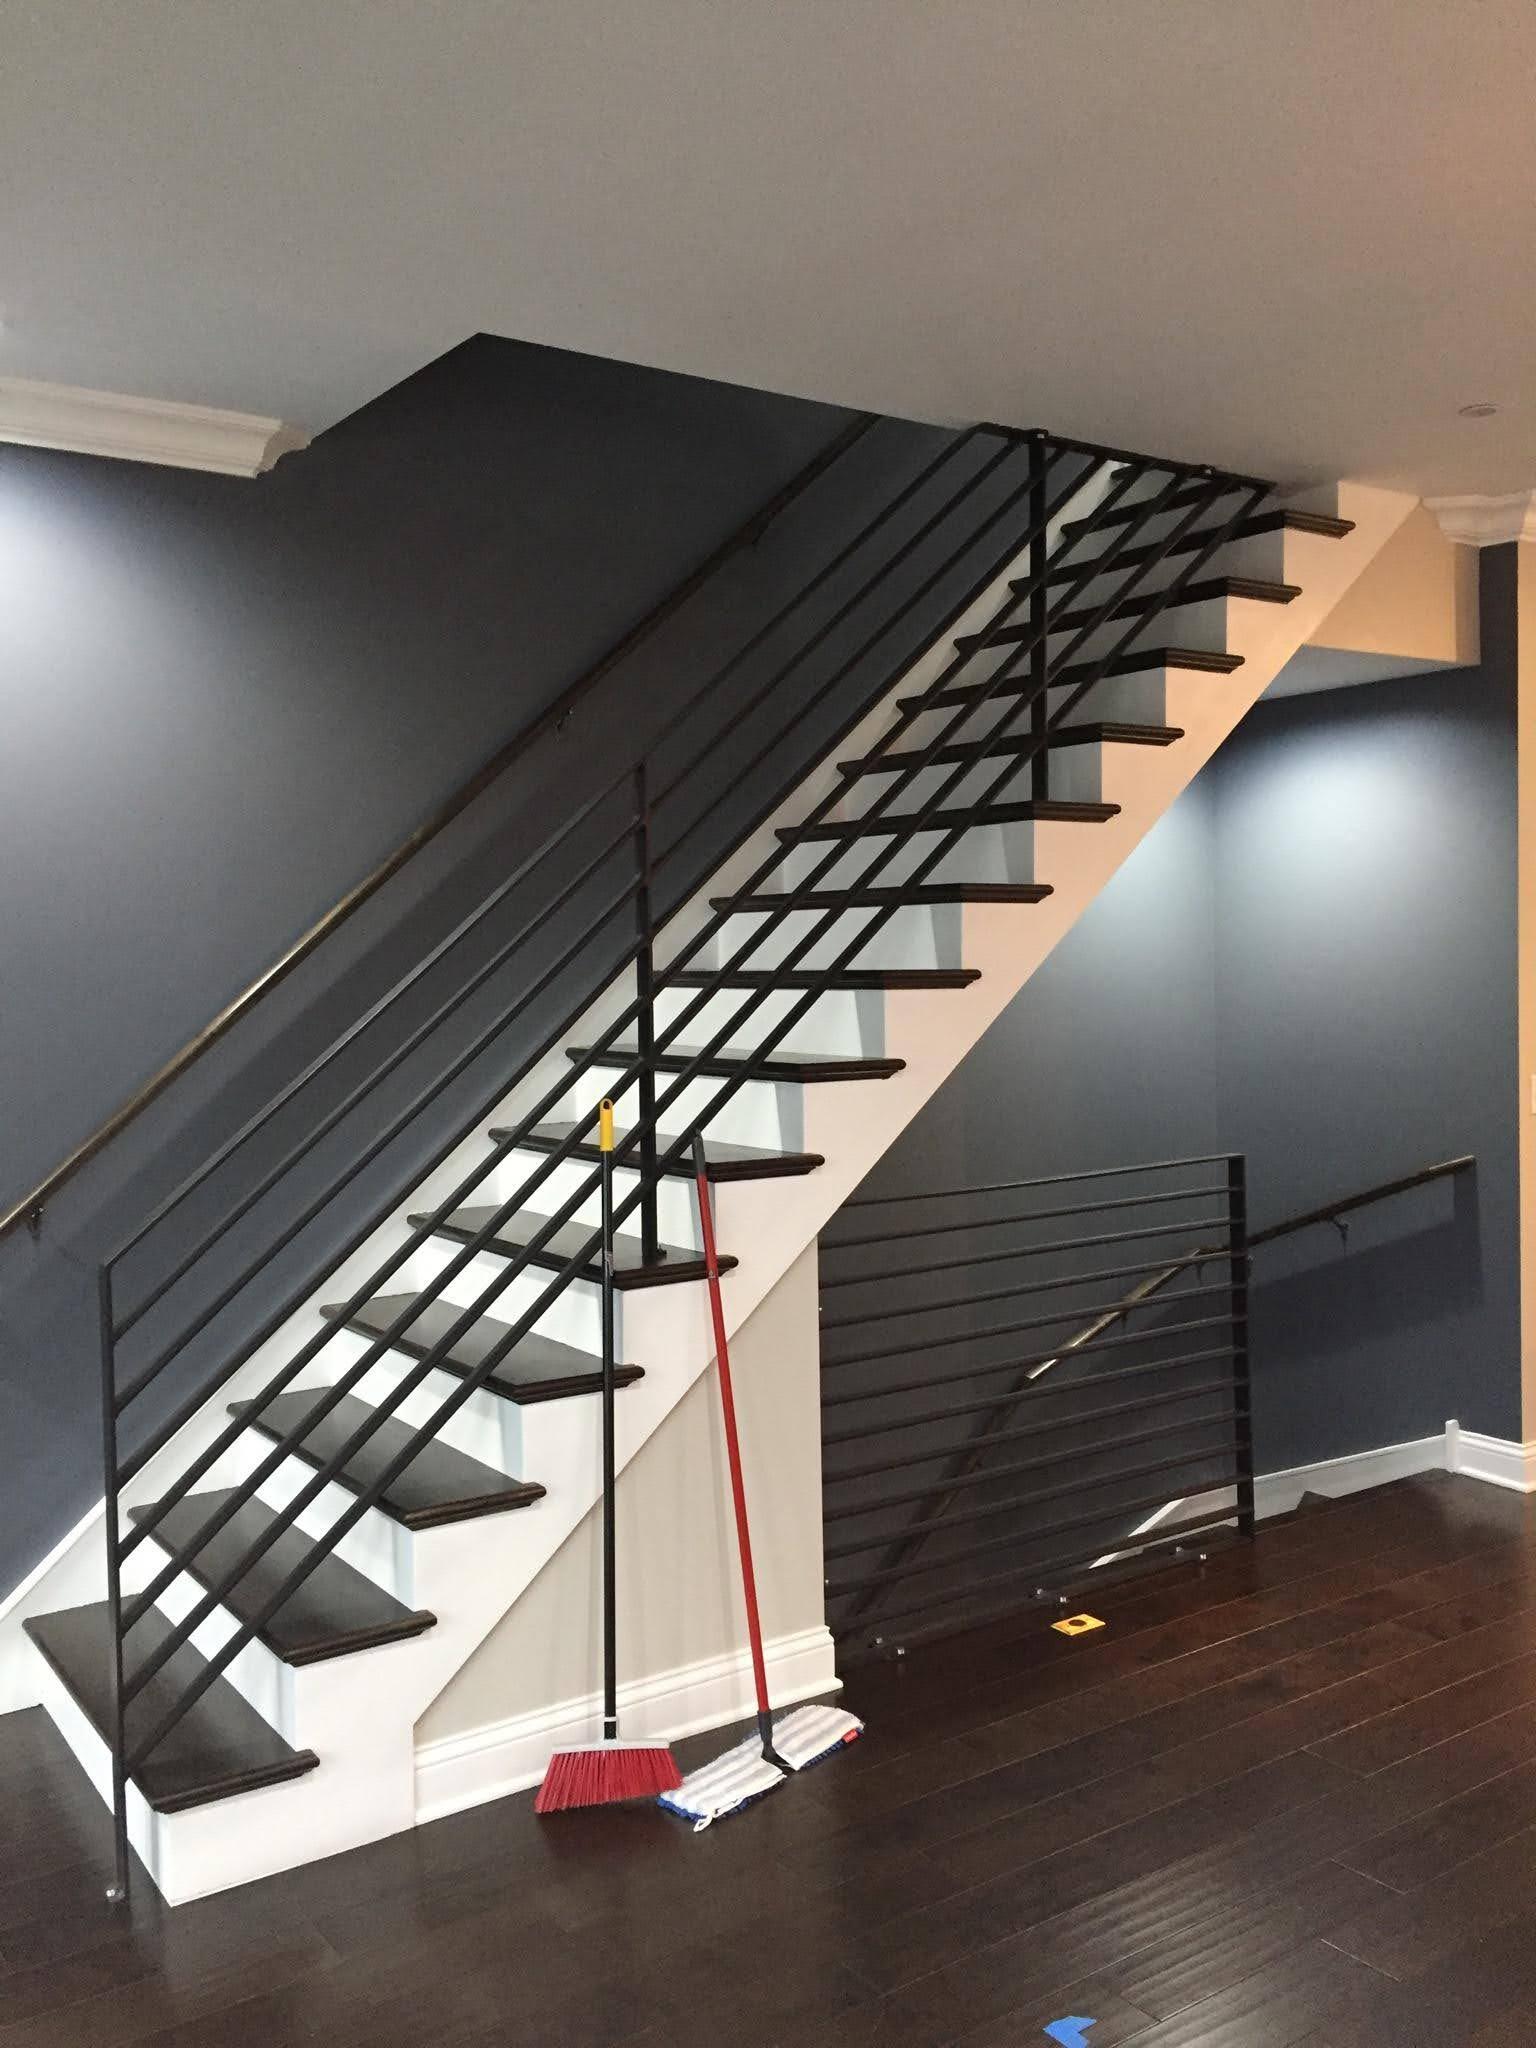 Newly Painted Wall and Stairs